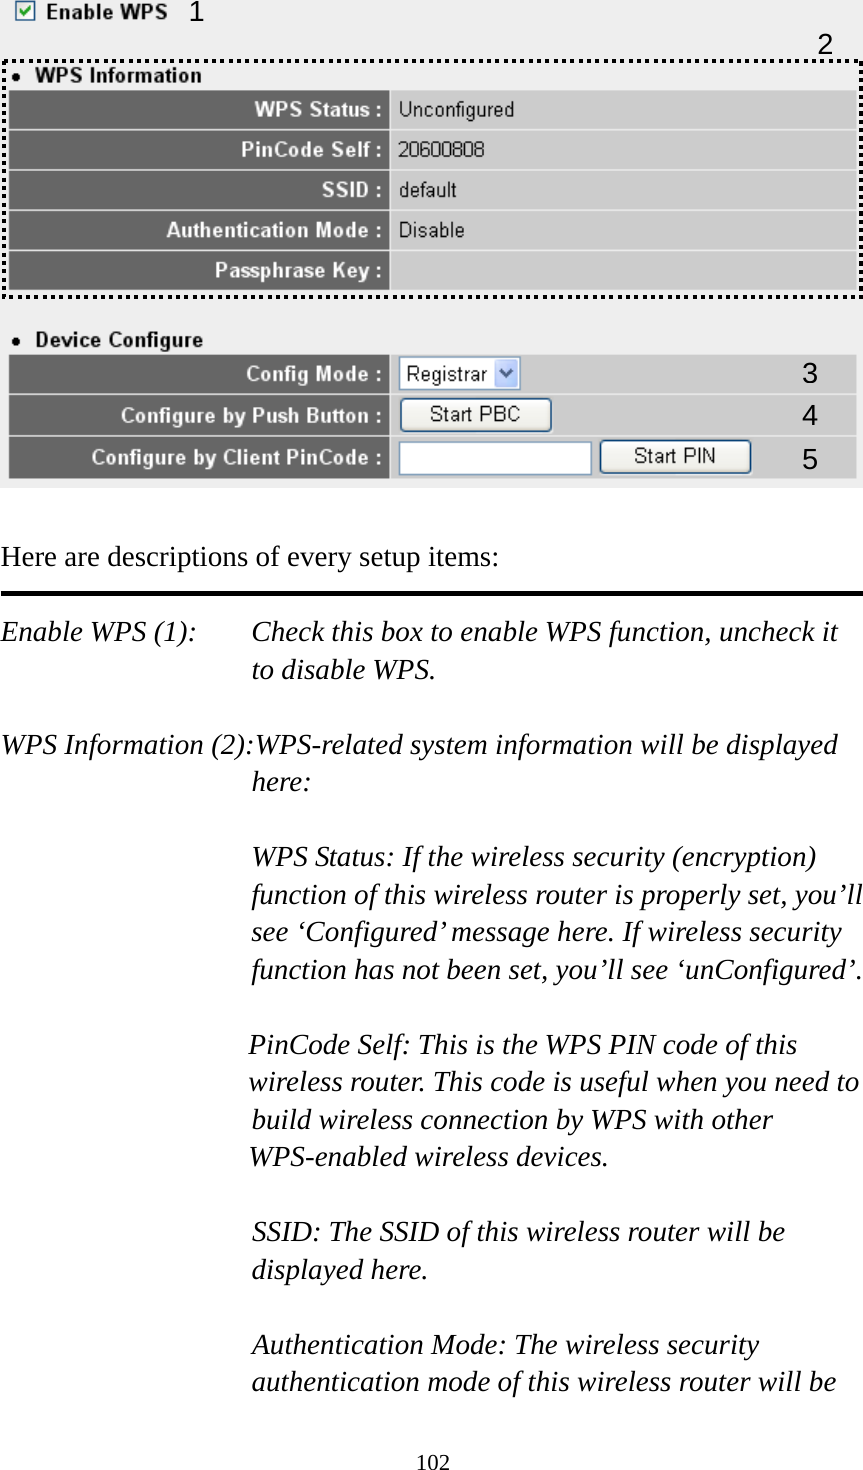 102   Here are descriptions of every setup items:  Enable WPS (1):  Check this box to enable WPS function, uncheck it to disable WPS.  WPS Information (2):WPS-related system information will be displayed here:  WPS Status: If the wireless security (encryption) function of this wireless router is properly set, you’ll see ‘Configured’ message here. If wireless security function has not been set, you’ll see ‘unConfigured’.  PinCode Self: This is the WPS PIN code of this wireless router. This code is useful when you need to  build wireless connection by WPS with other WPS-enabled wireless devices.  SSID: The SSID of this wireless router will be displayed here.  Authentication Mode: The wireless security authentication mode of this wireless router will be 1 34 25 